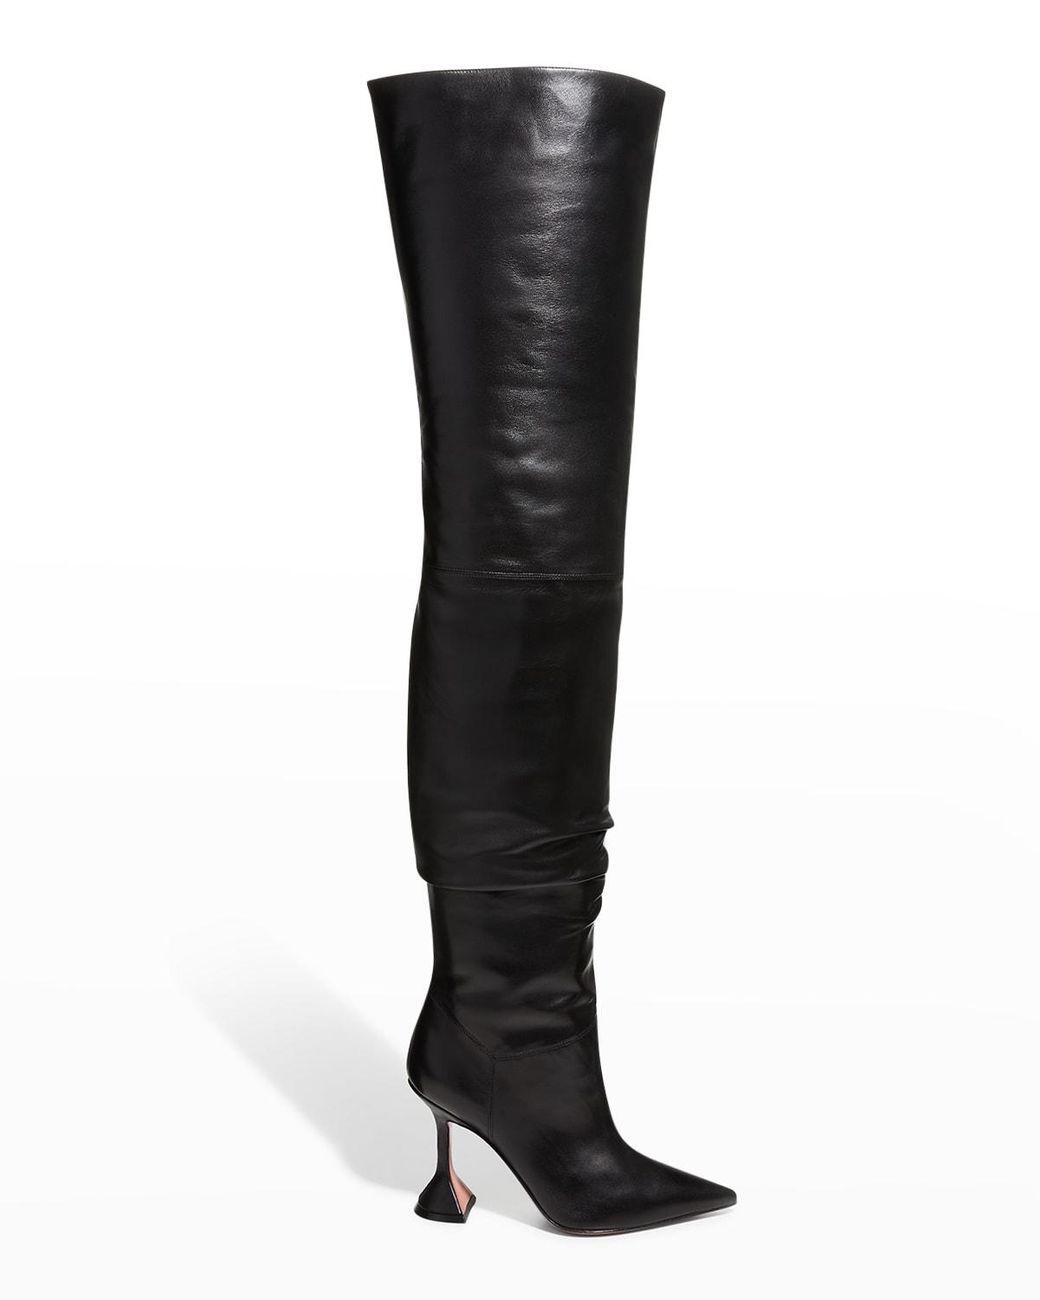 AMINA MUADDI Olivia Slouchy Over-the-knee Boots in Black | Lyst